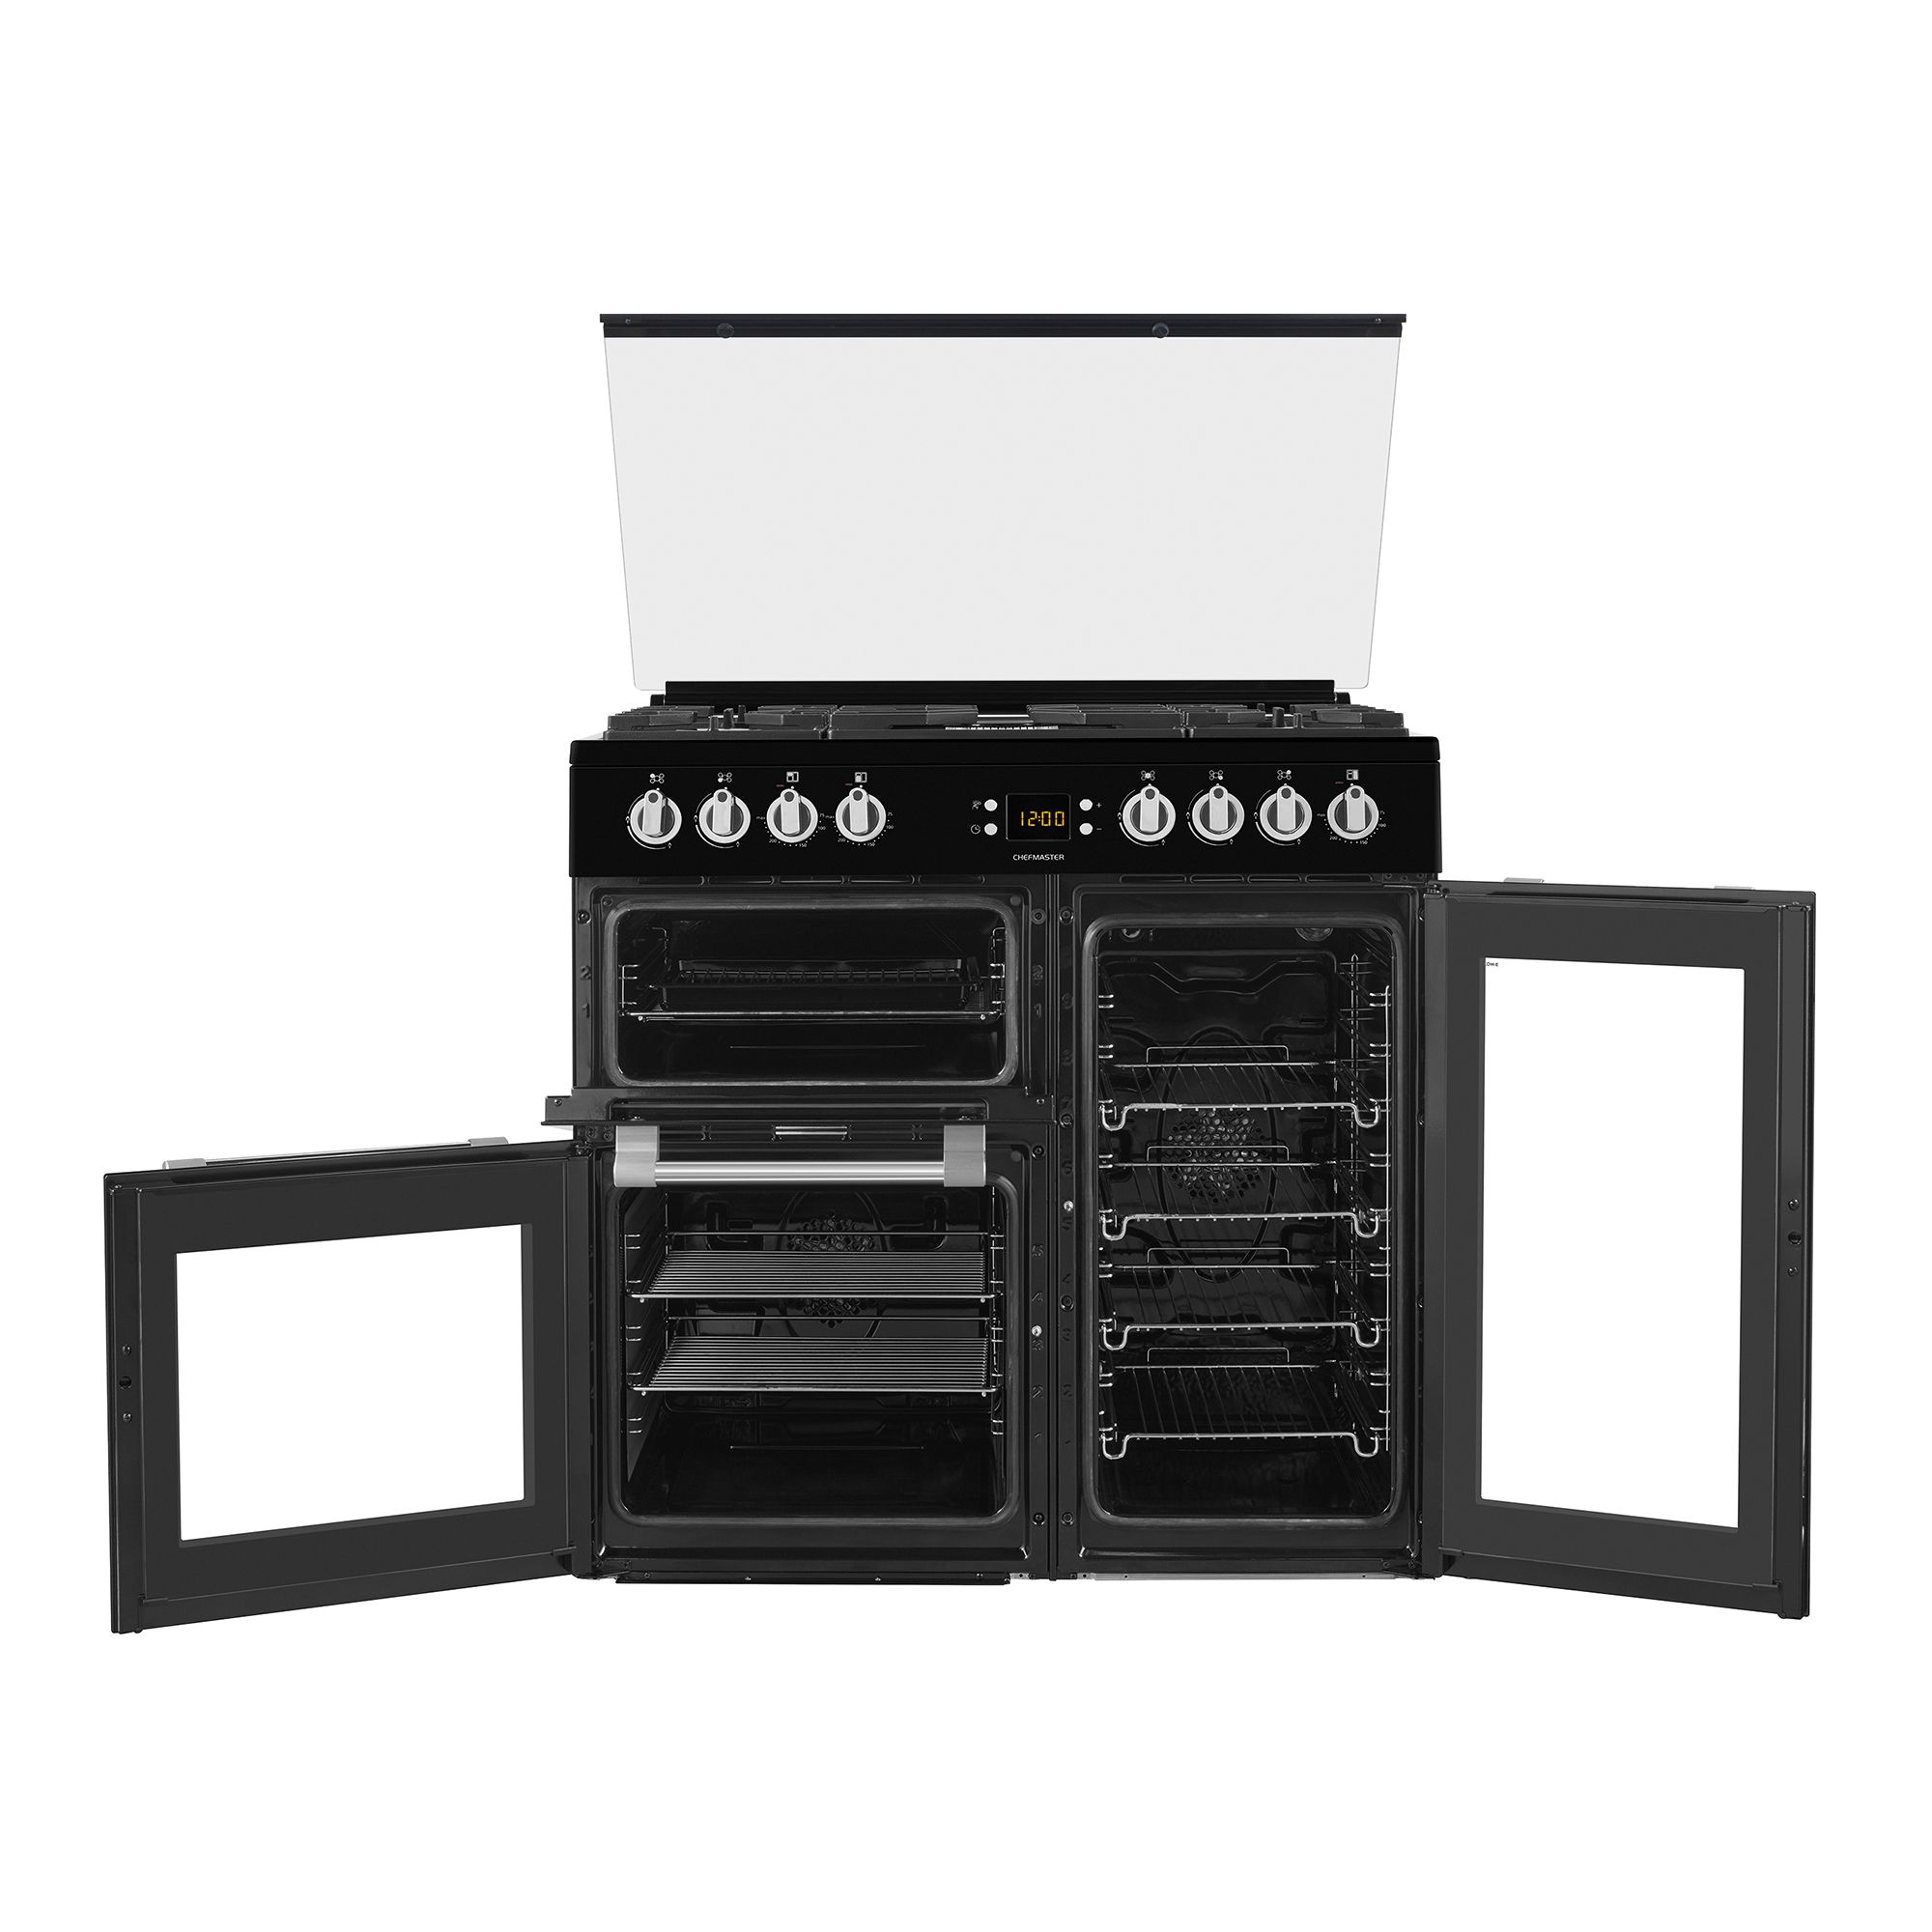 Leisure CC90F531K Freestanding Electric Range cooker with Gas Hob - Black